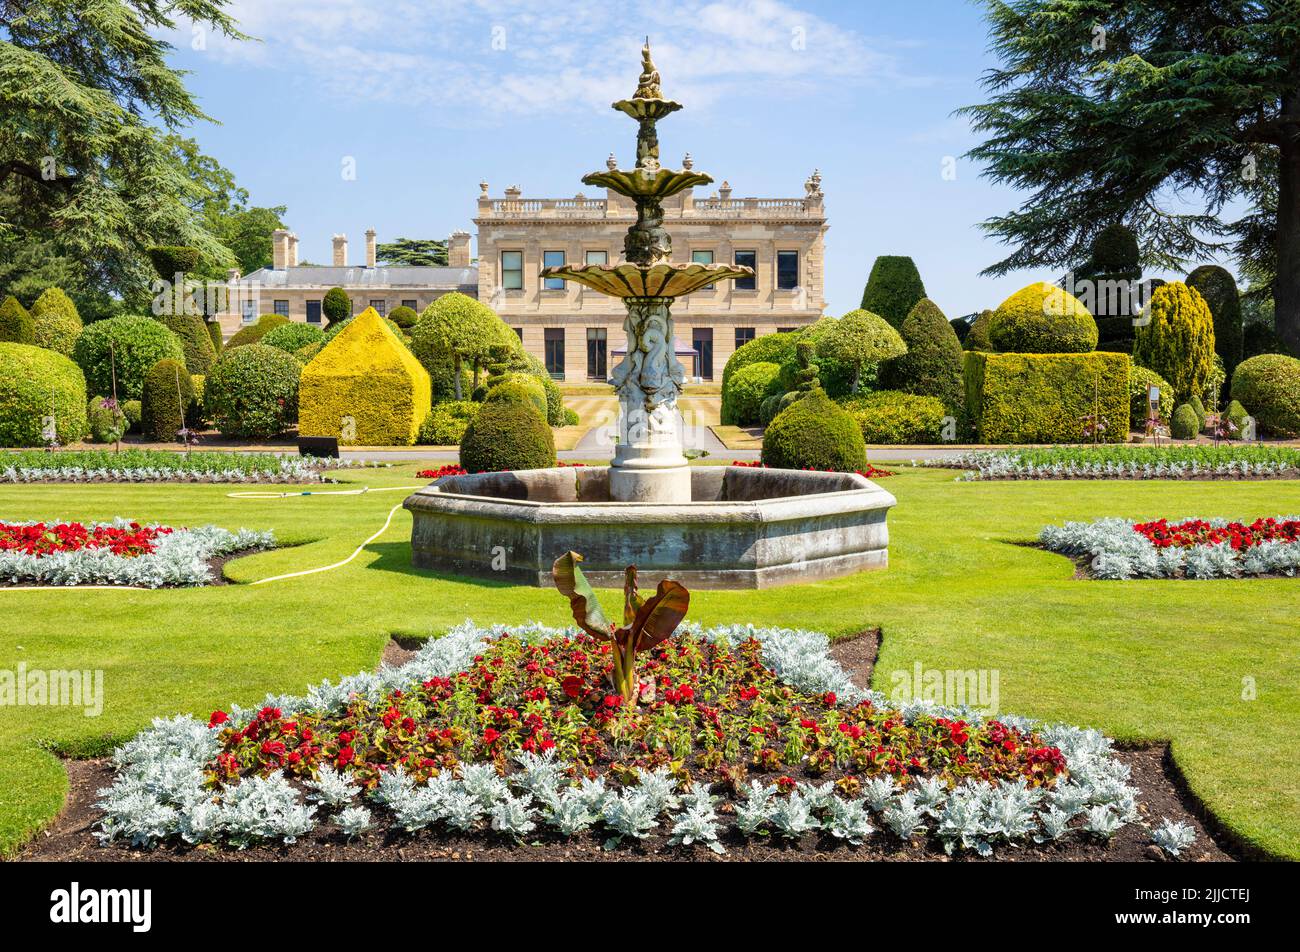 Brodsworth hall and gardens Formal gardens and fountain in a Victorian country house at Brodsworth near Doncaster South Yorkshire England uk gb Europe Stock Photo